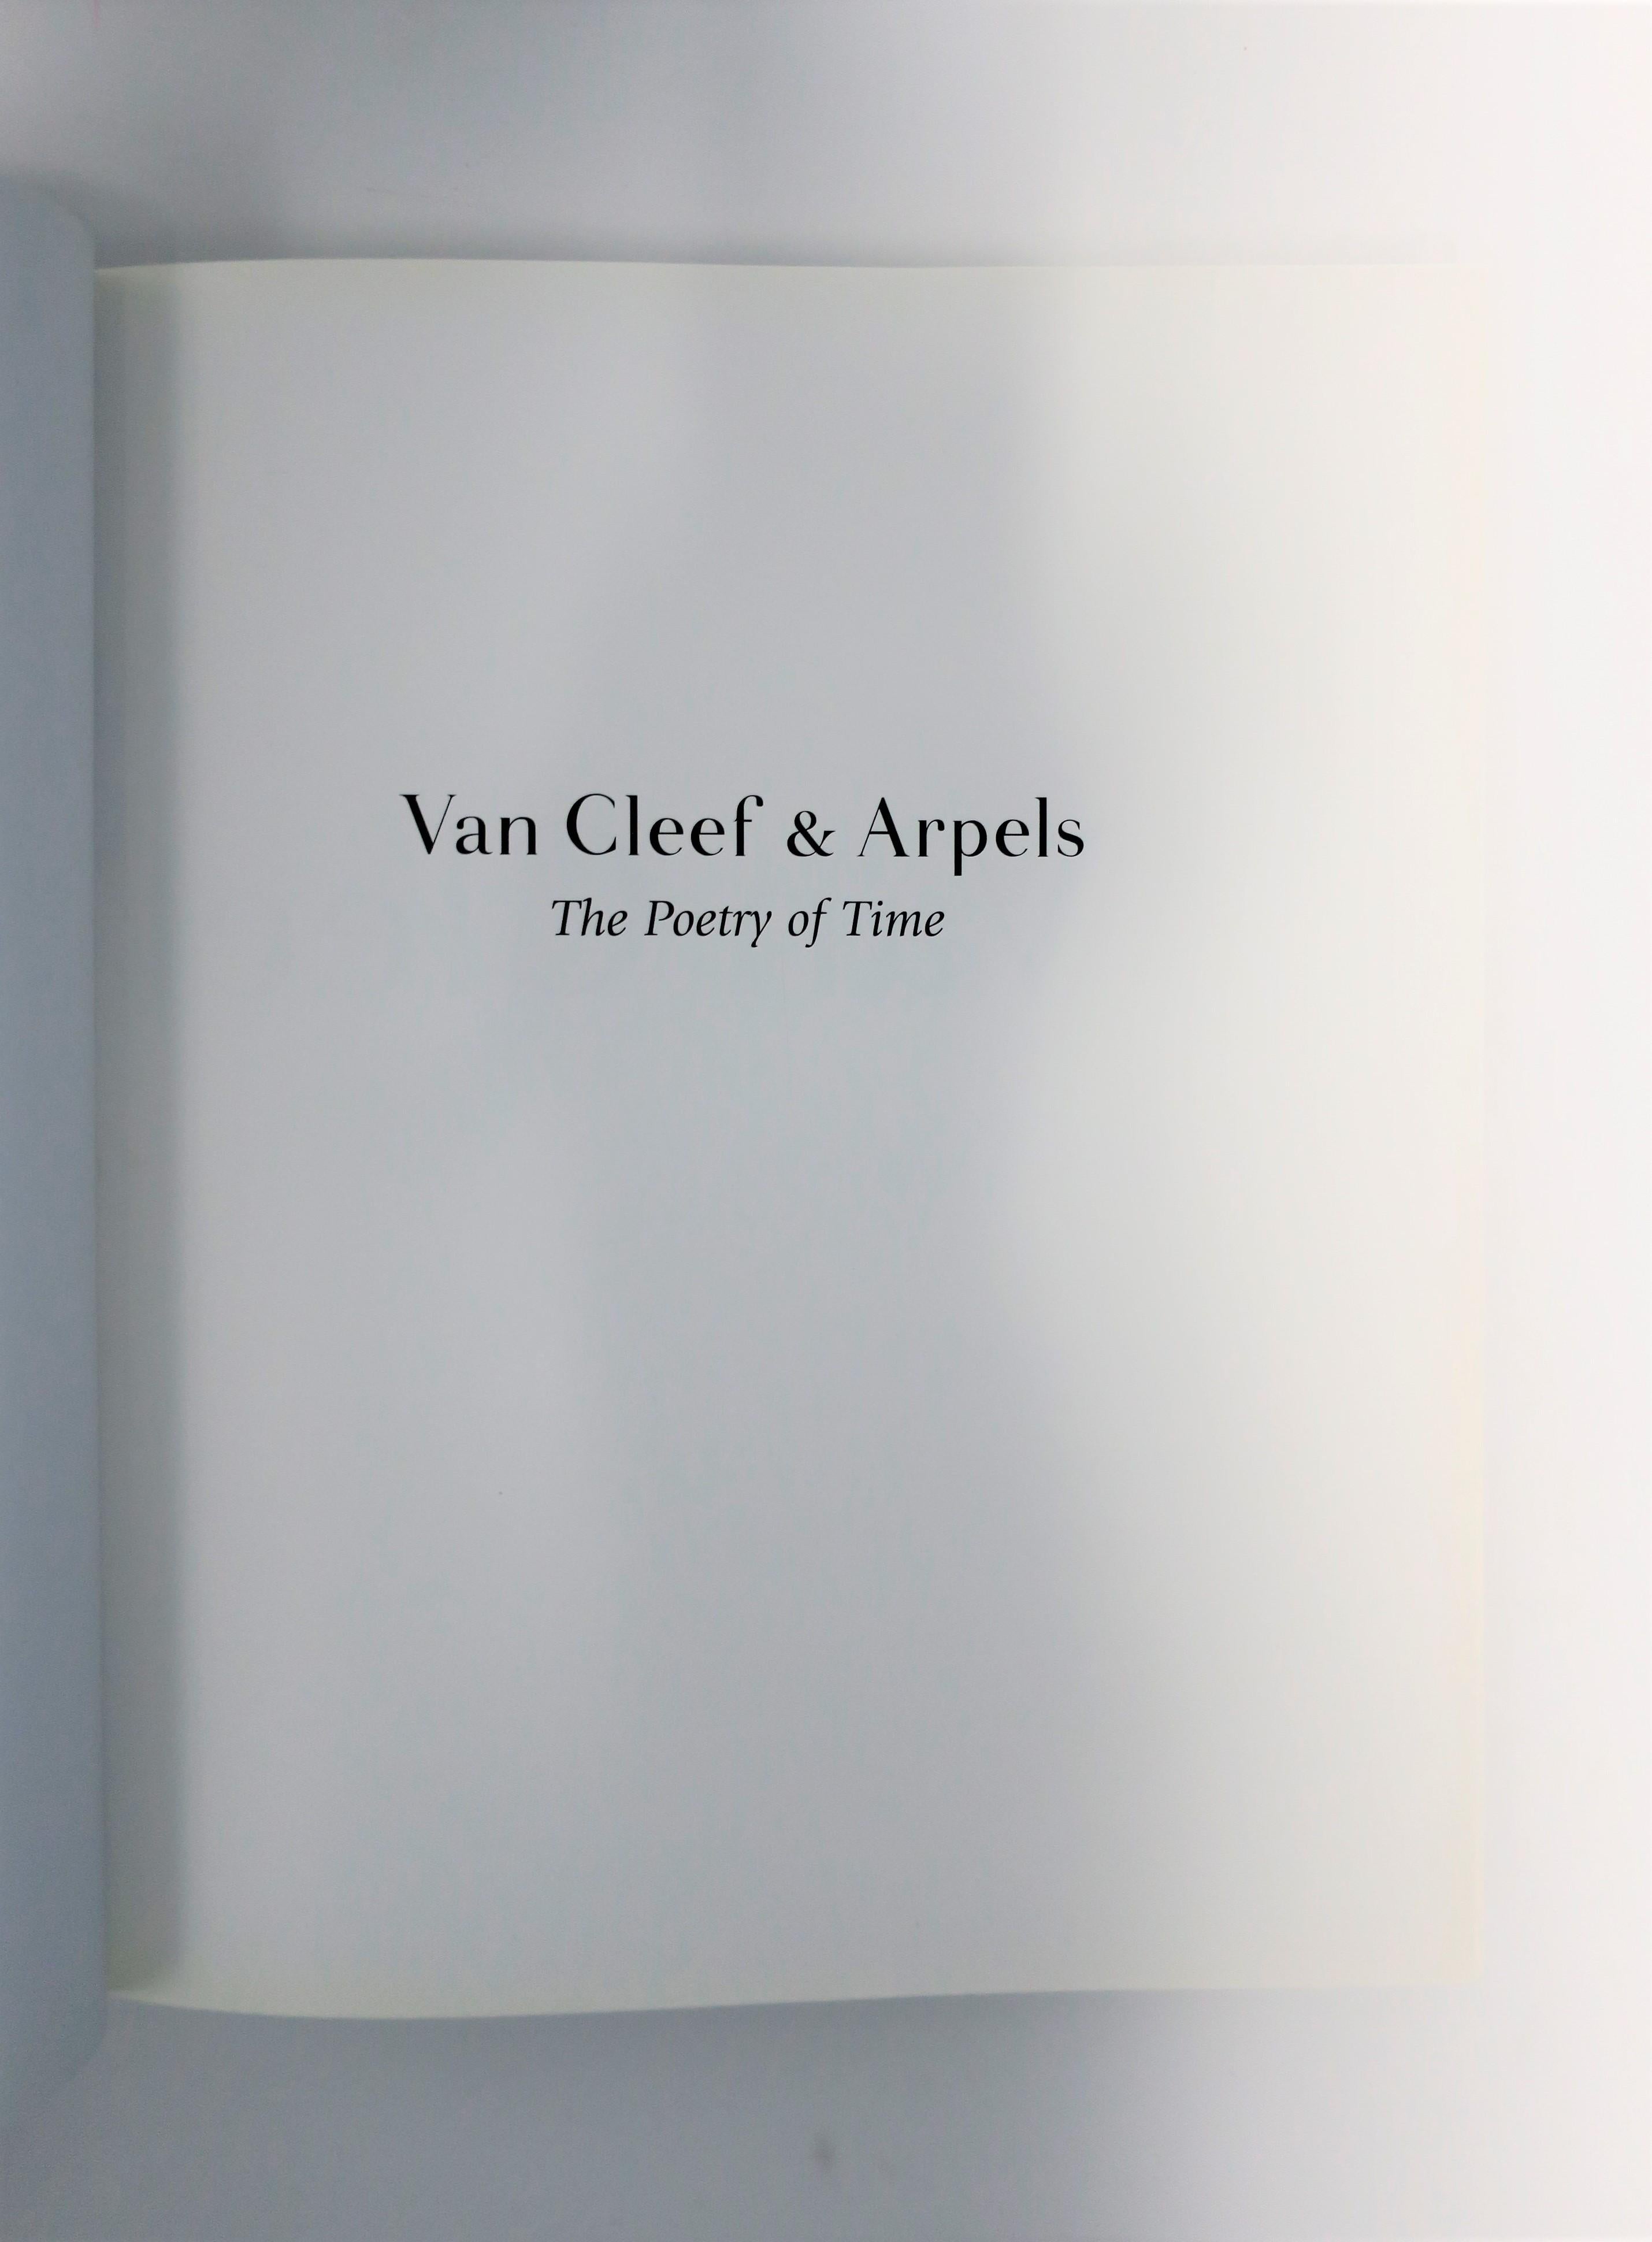 Contemporary Van Cleef & Arpels, The Poetry of Time, Coffee Table or Library Book